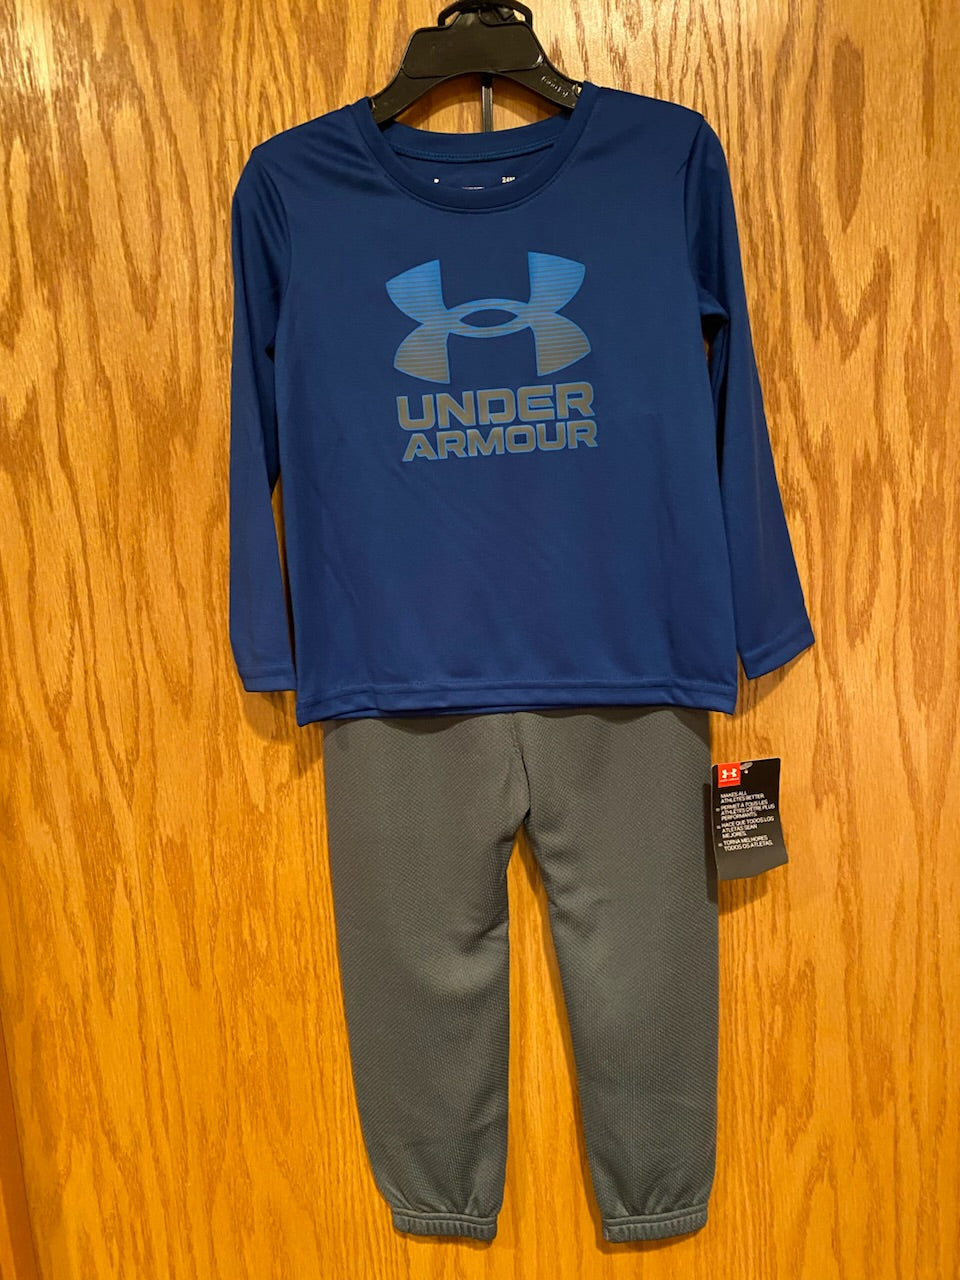 NEW Under Armour 2-Piece Set - Blue L/S and Gray Pants Size  24 months